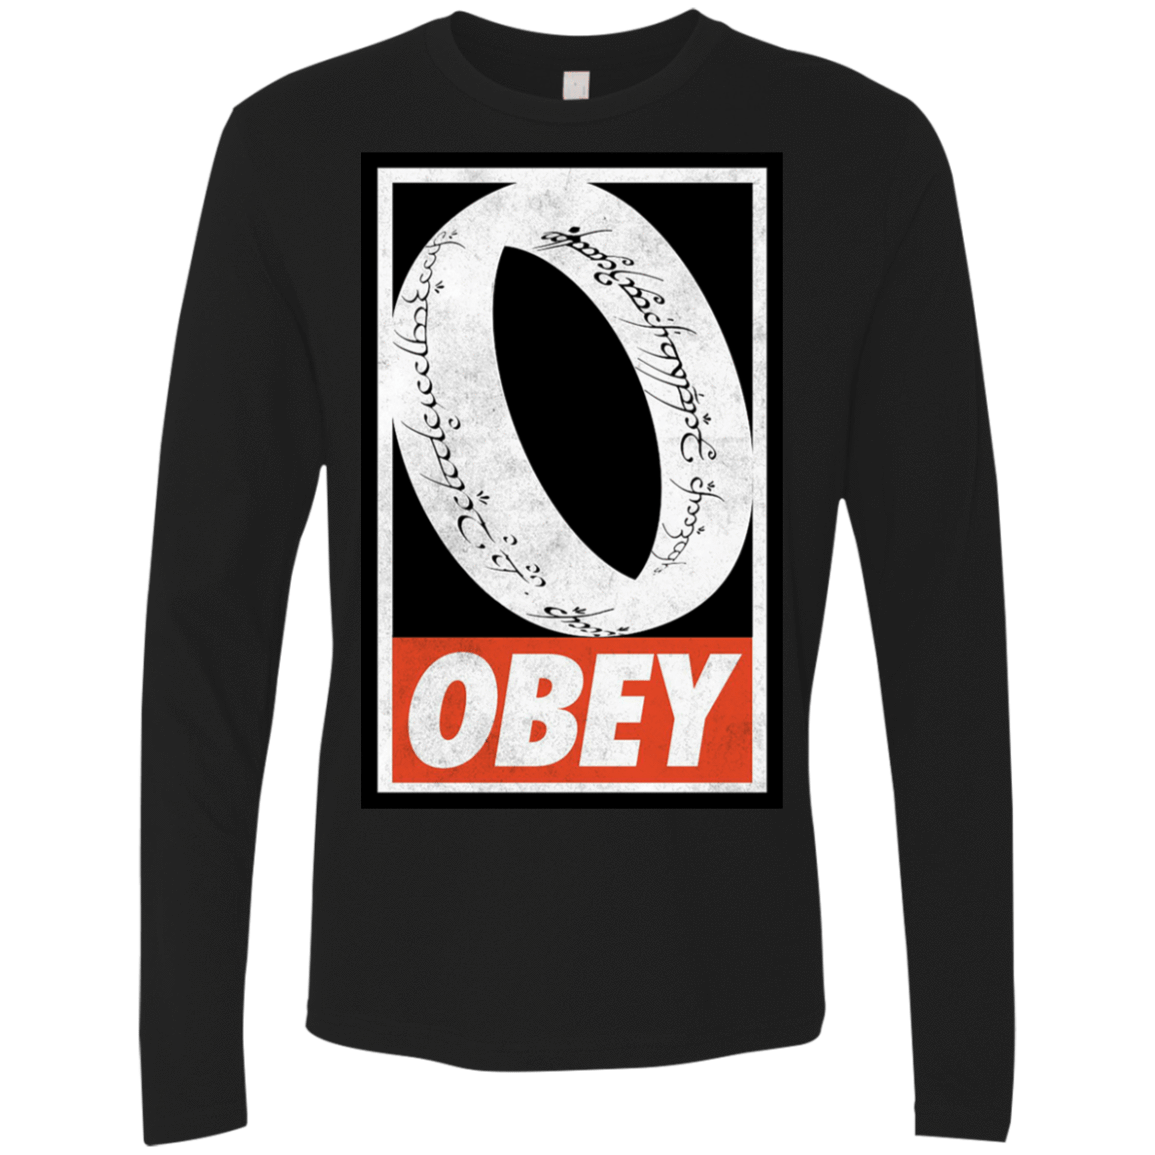 T-Shirts Black / S Obey One Ring Men's Premium Long Sleeve